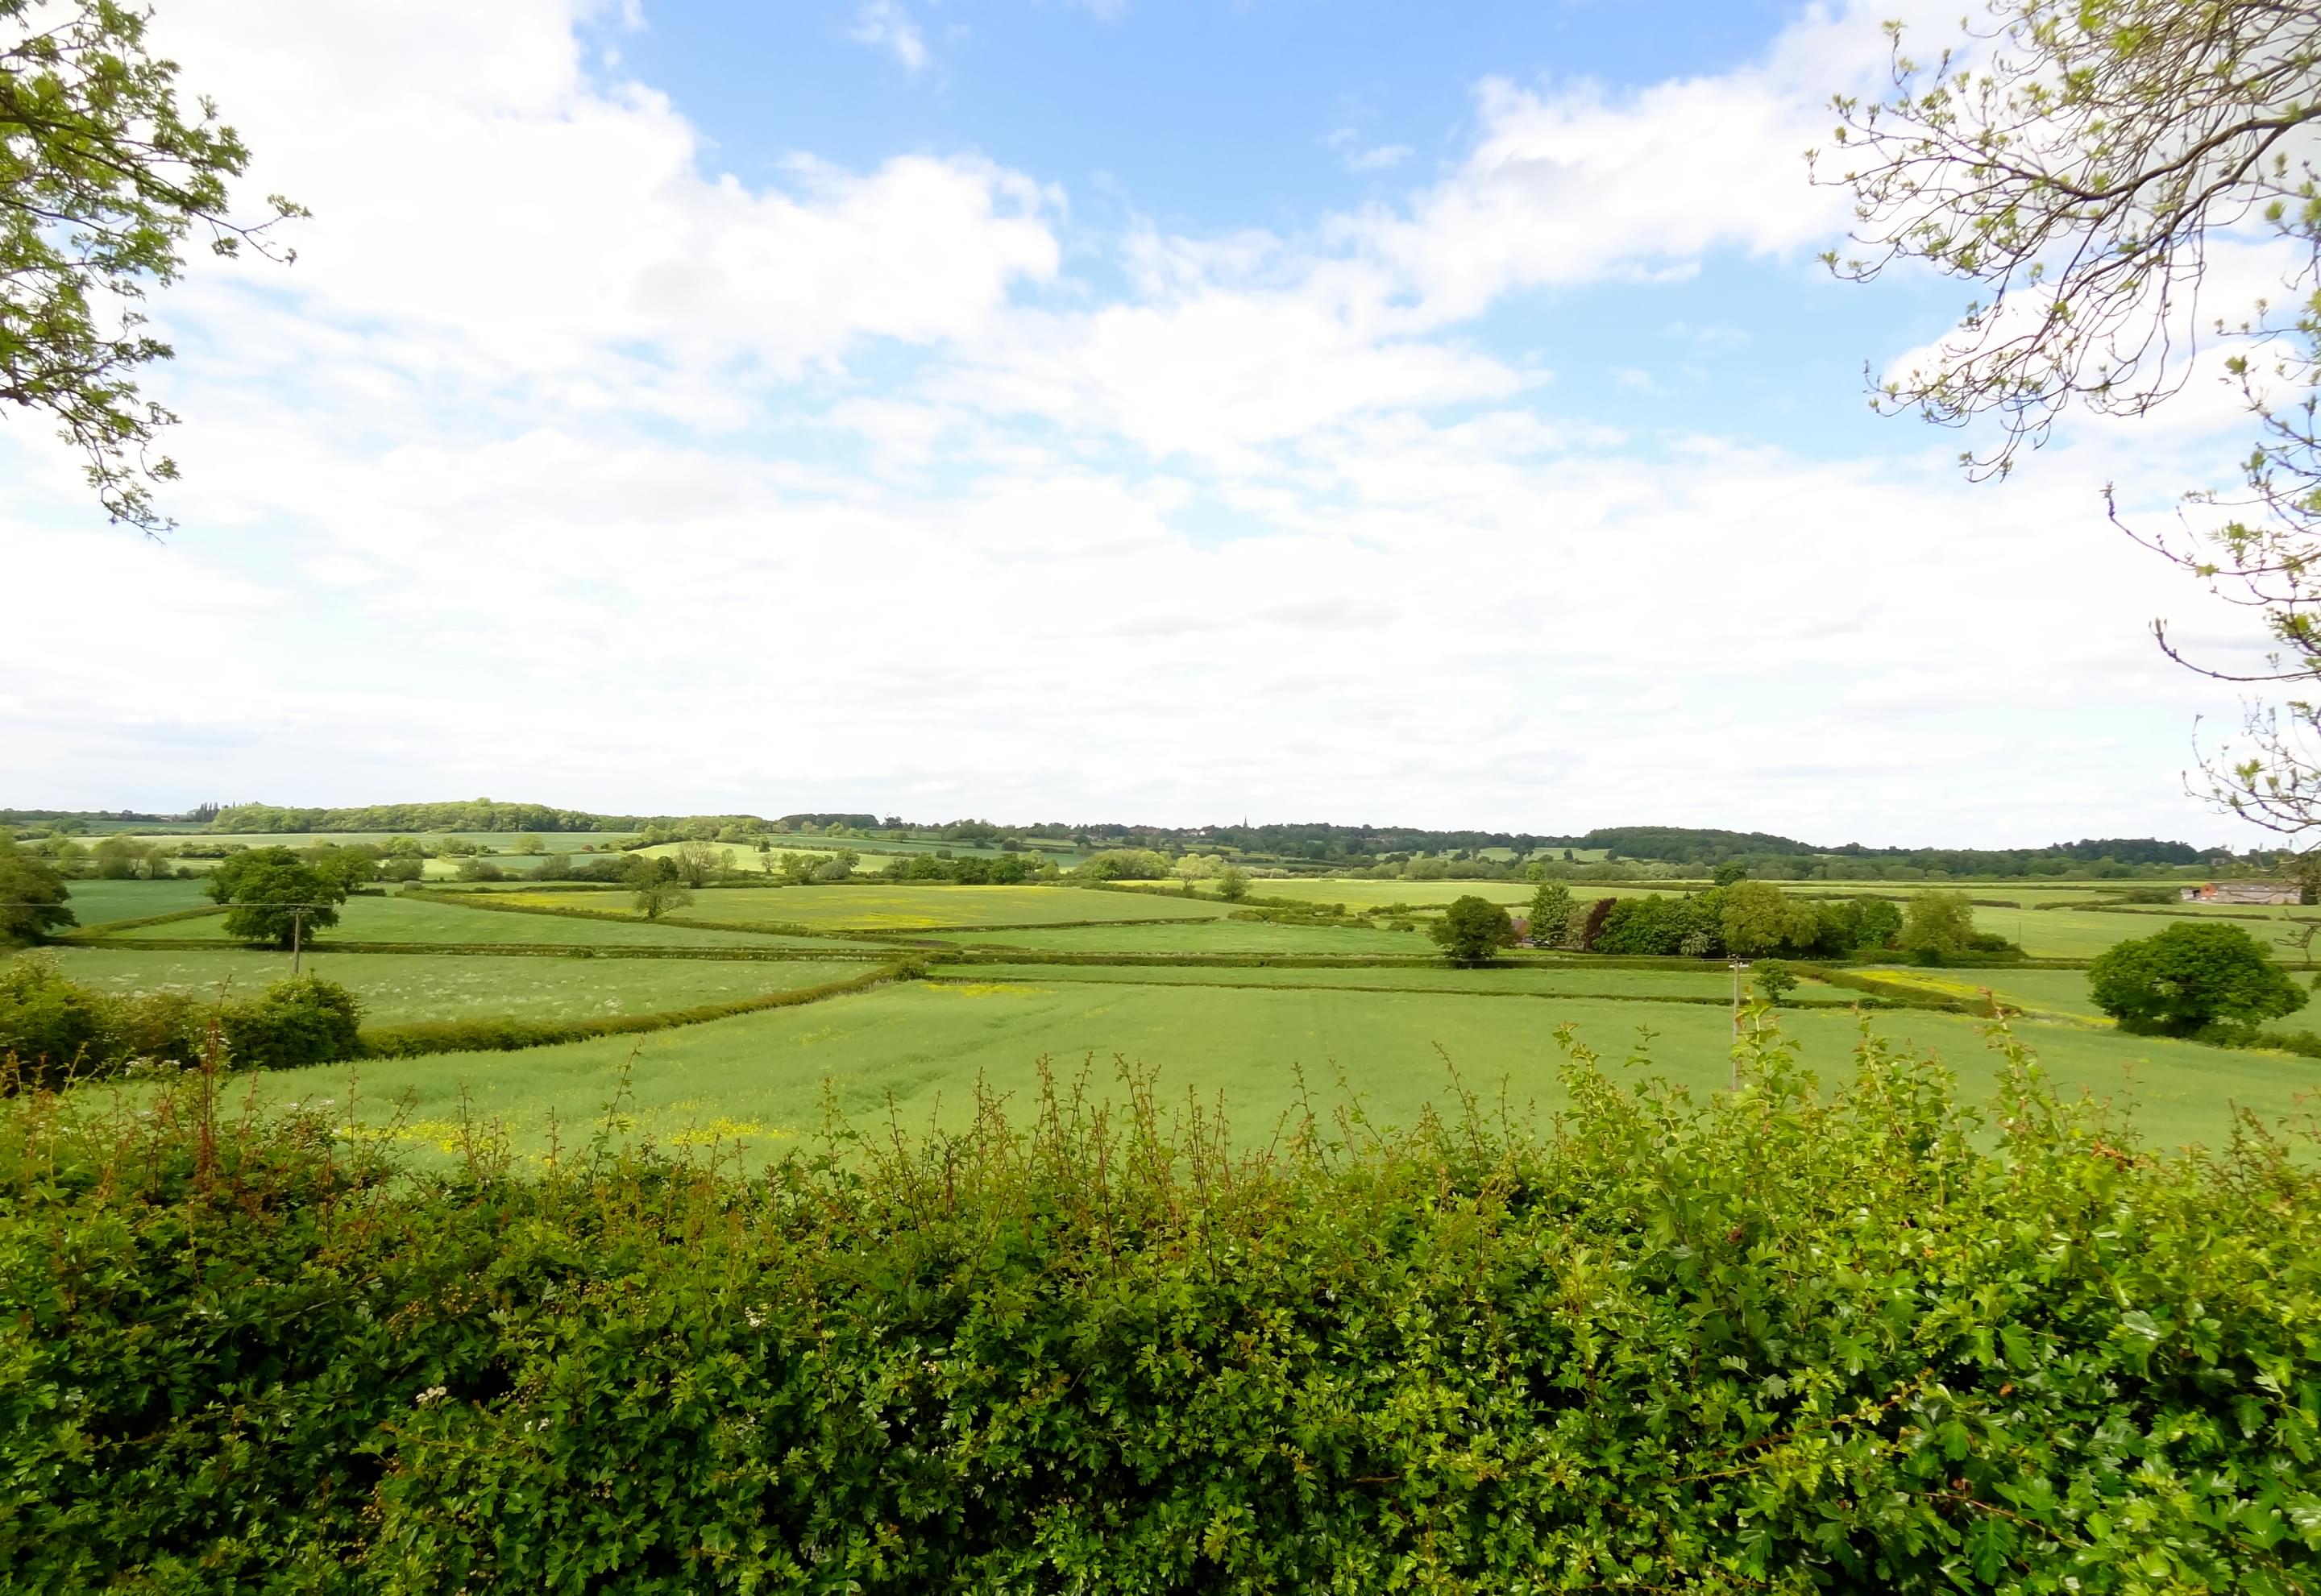 Bosworth Battlefield Overview